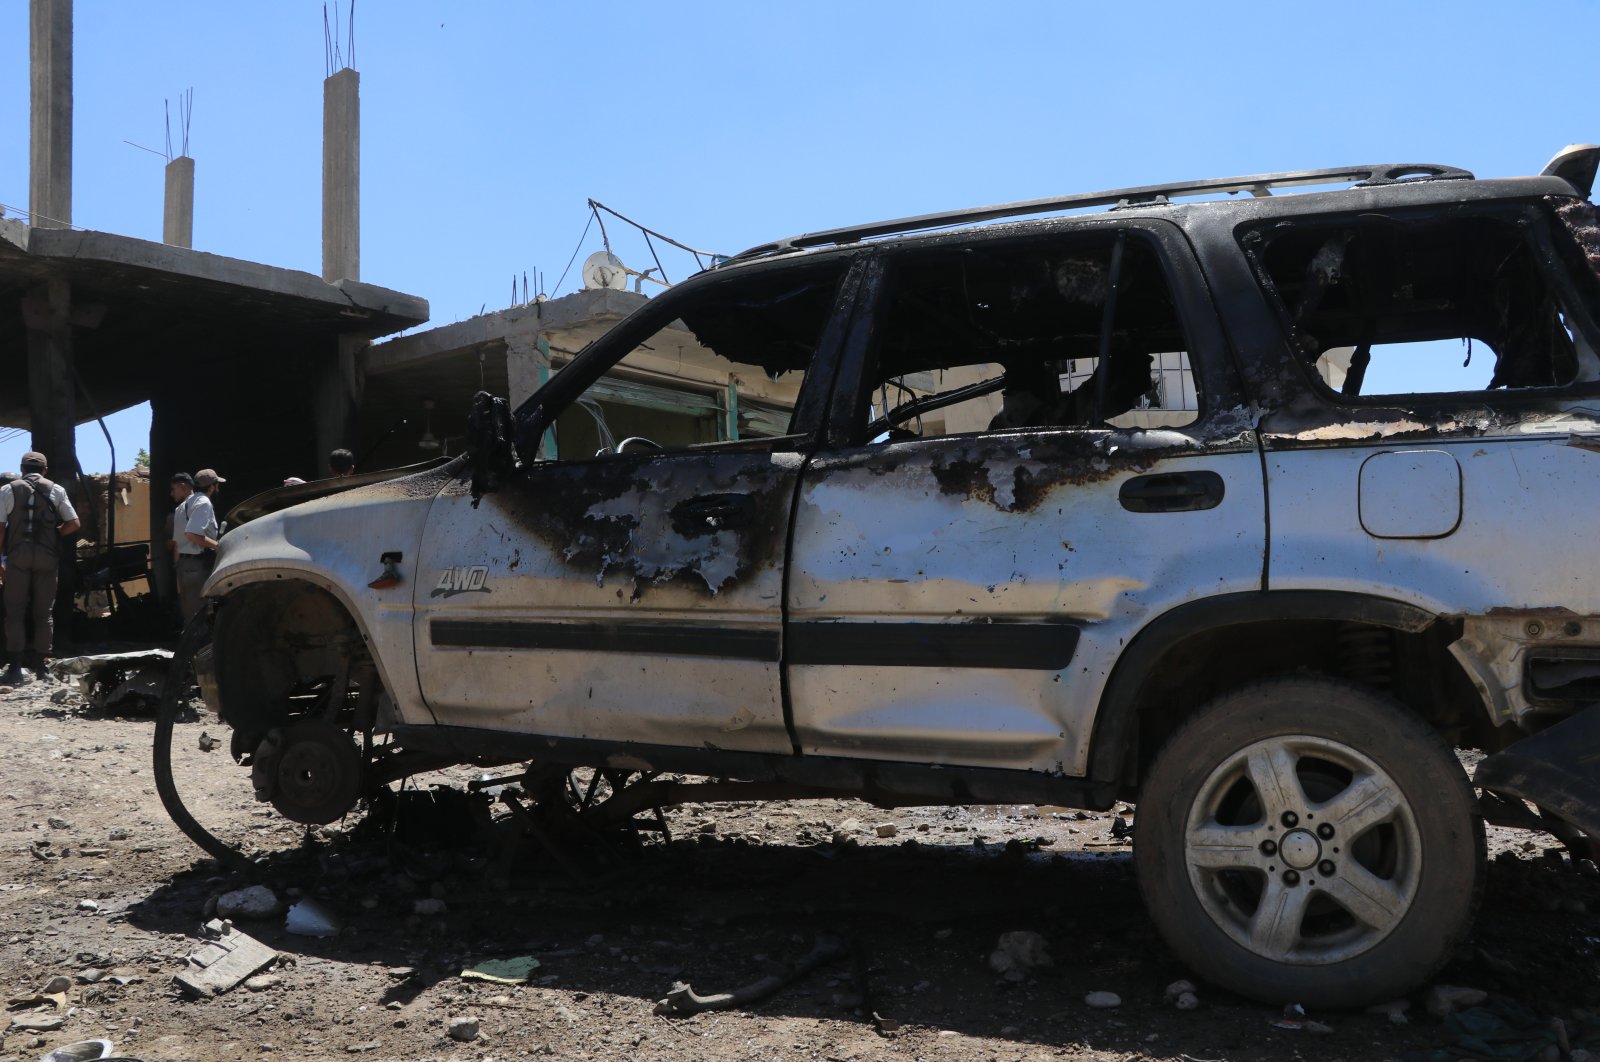 A car damaged by a YPG/PKK terrorist attack in Syria’s Tal Hafar, June 23, 2020. (AA Photo)